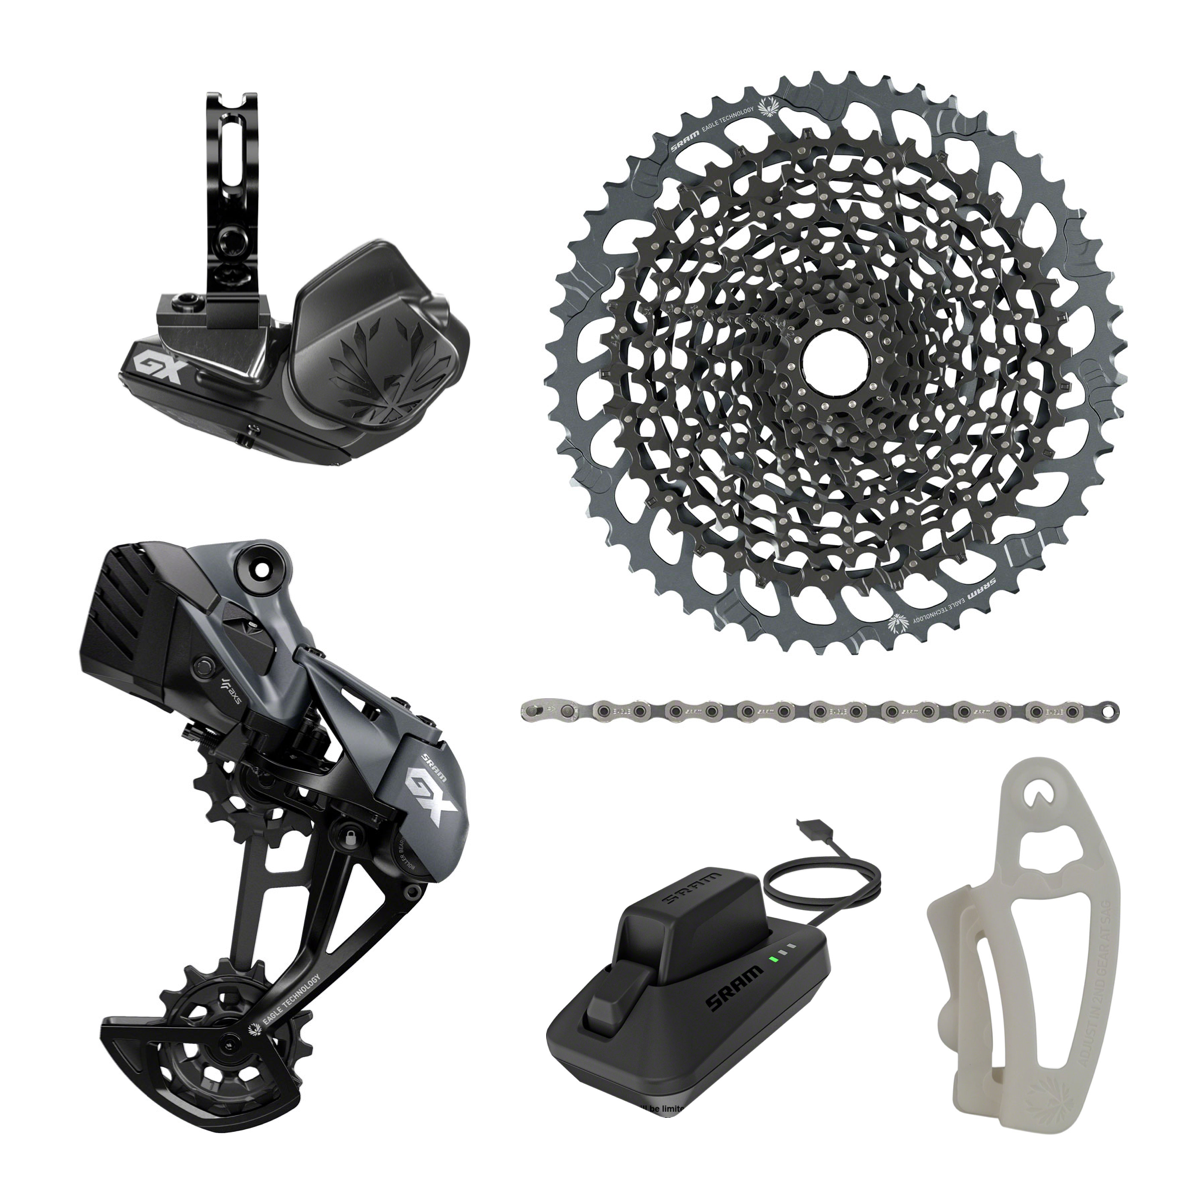 NEW SRAM GX Eagle AXS Upgrade Kit - Rear Derailleur, Shifter, Cassette 10-52t, Chain, Charger/Cord, Battery